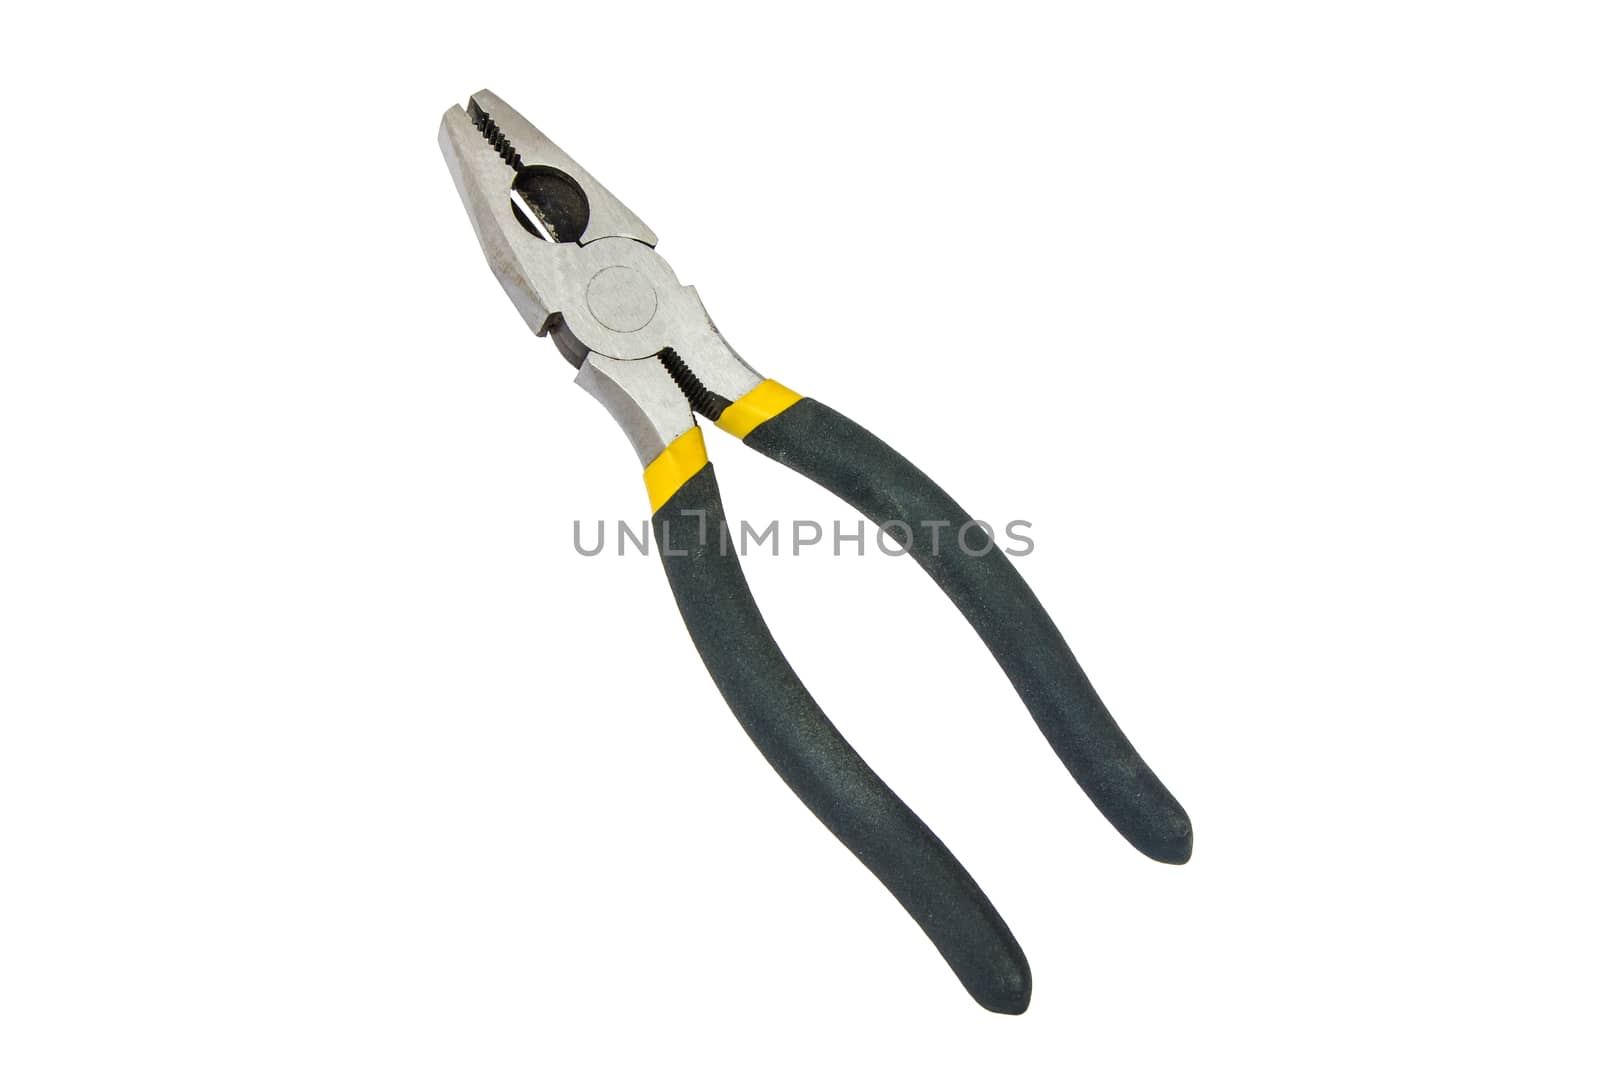 Pliers and wire cutter element isolated on white by huntz